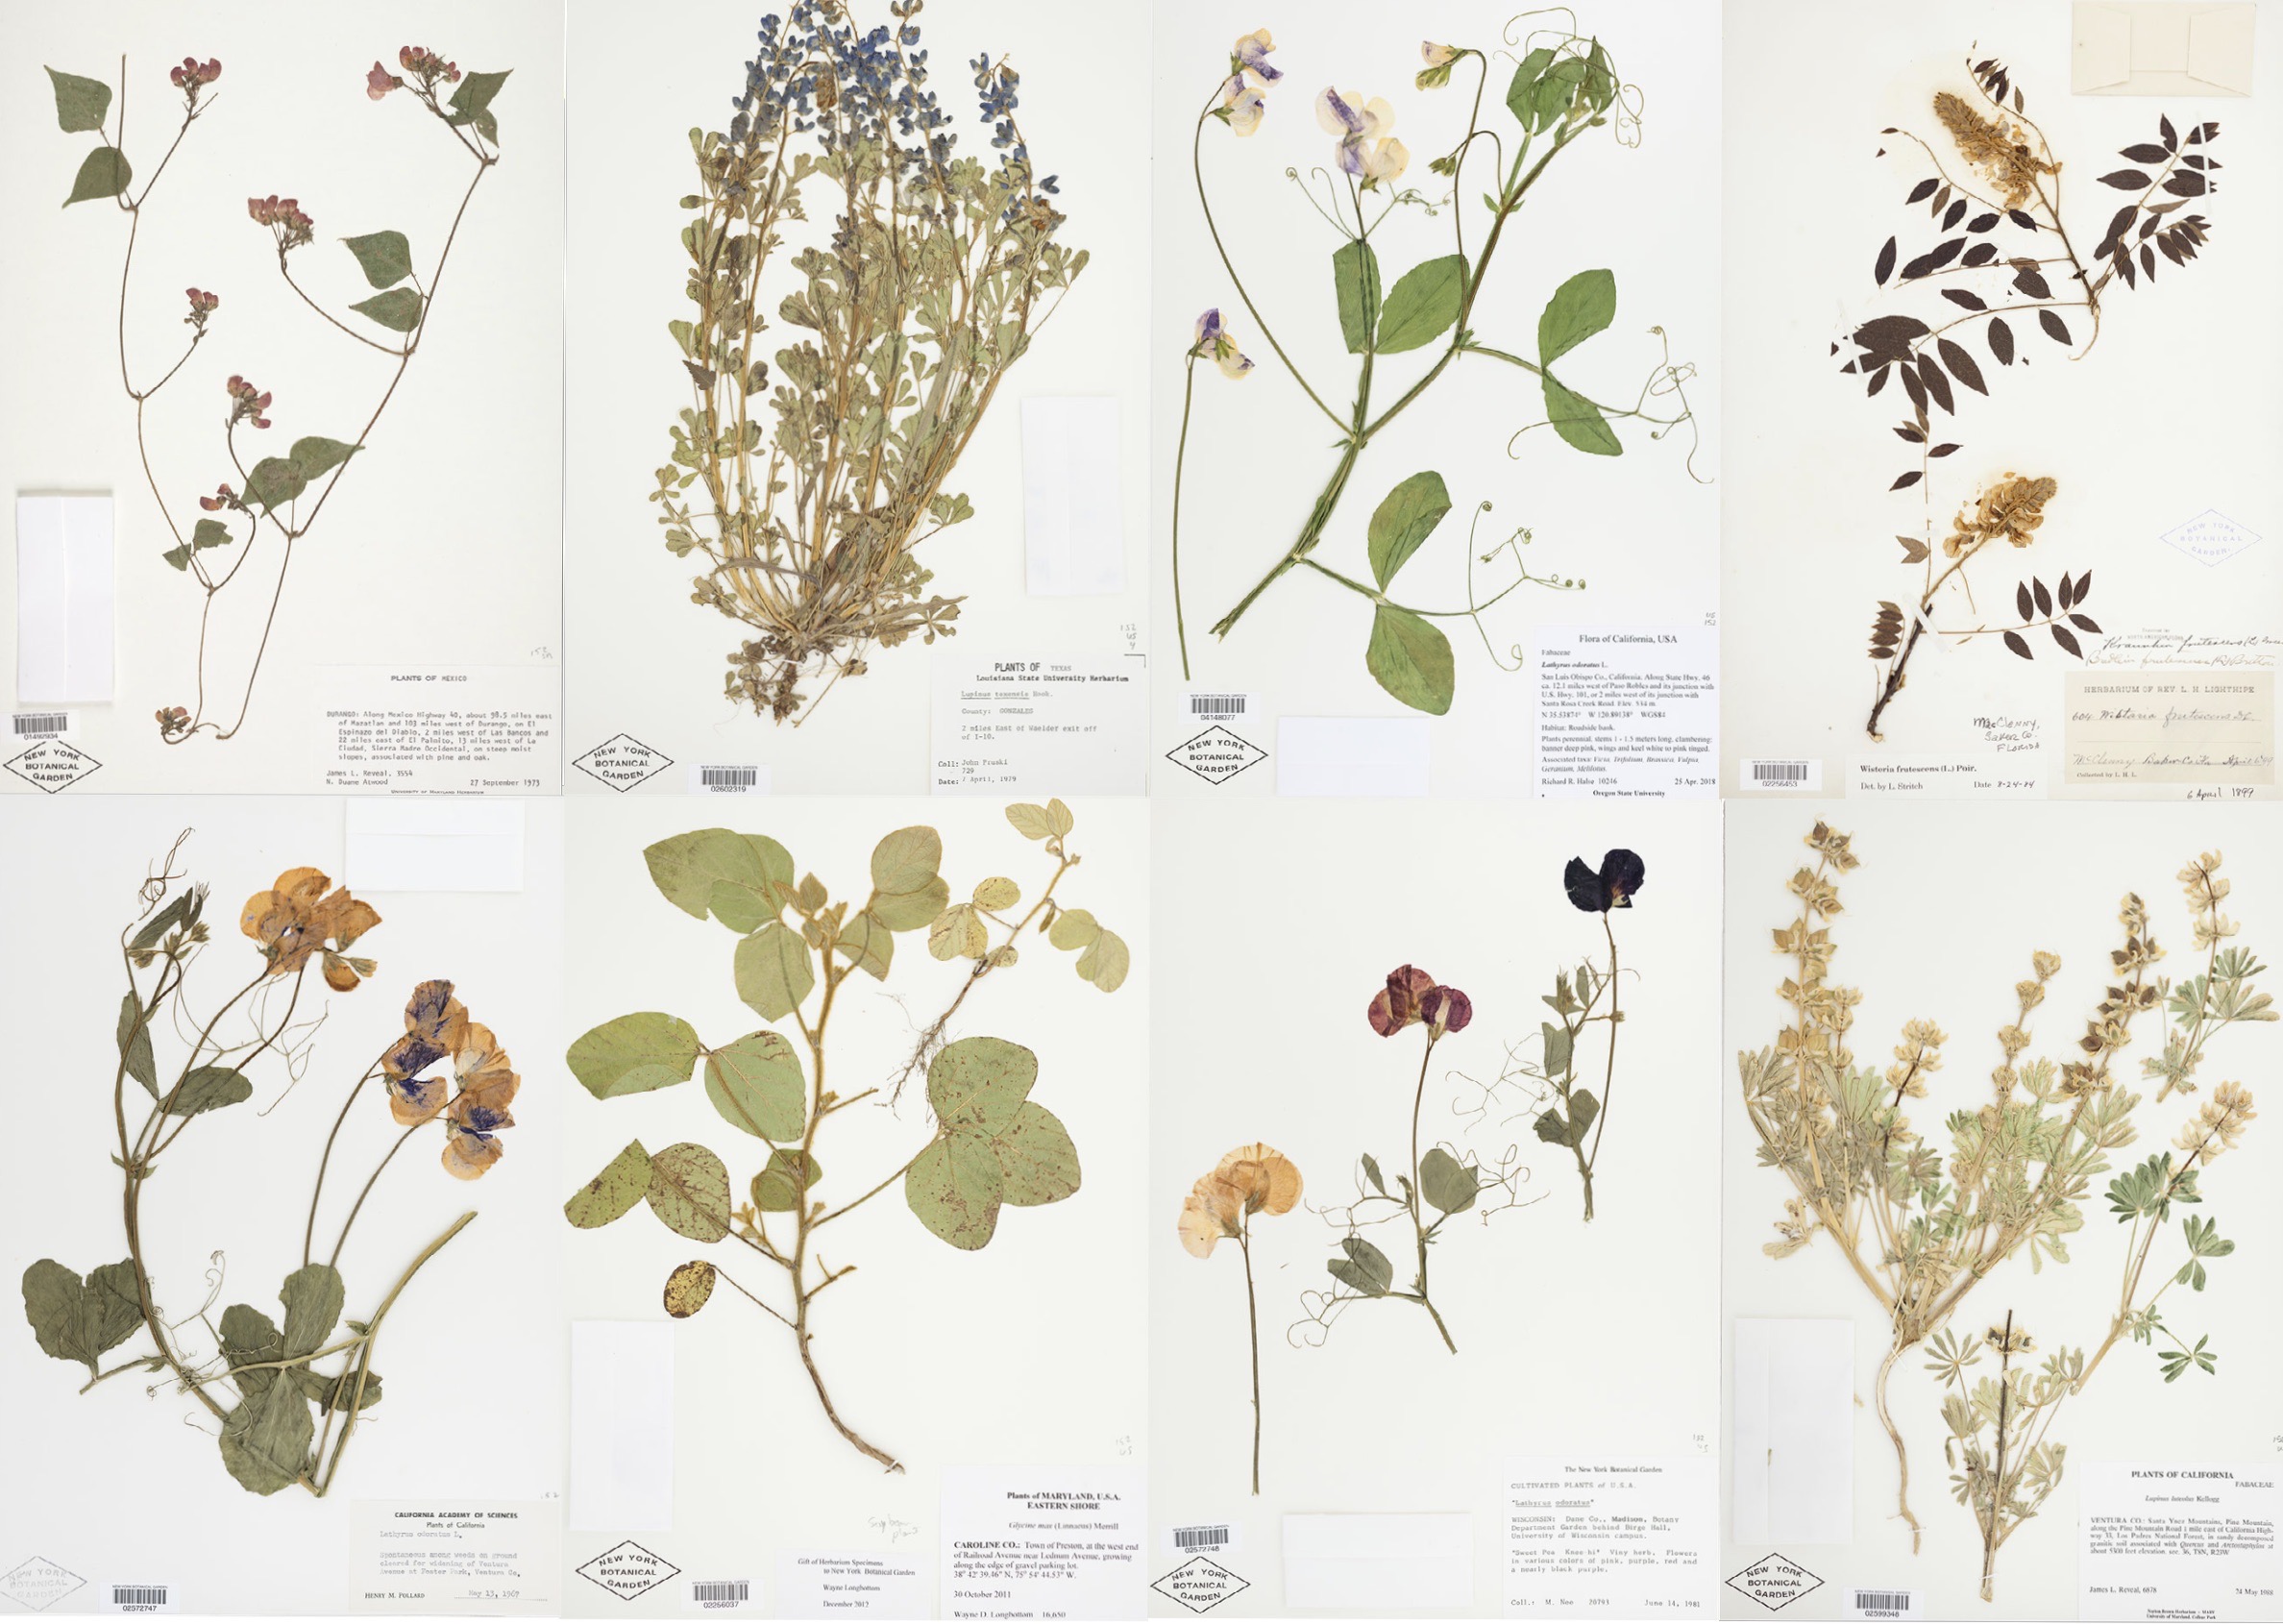 Eight dried plant specimens from the NYBG Herbarium, laid out in a grid